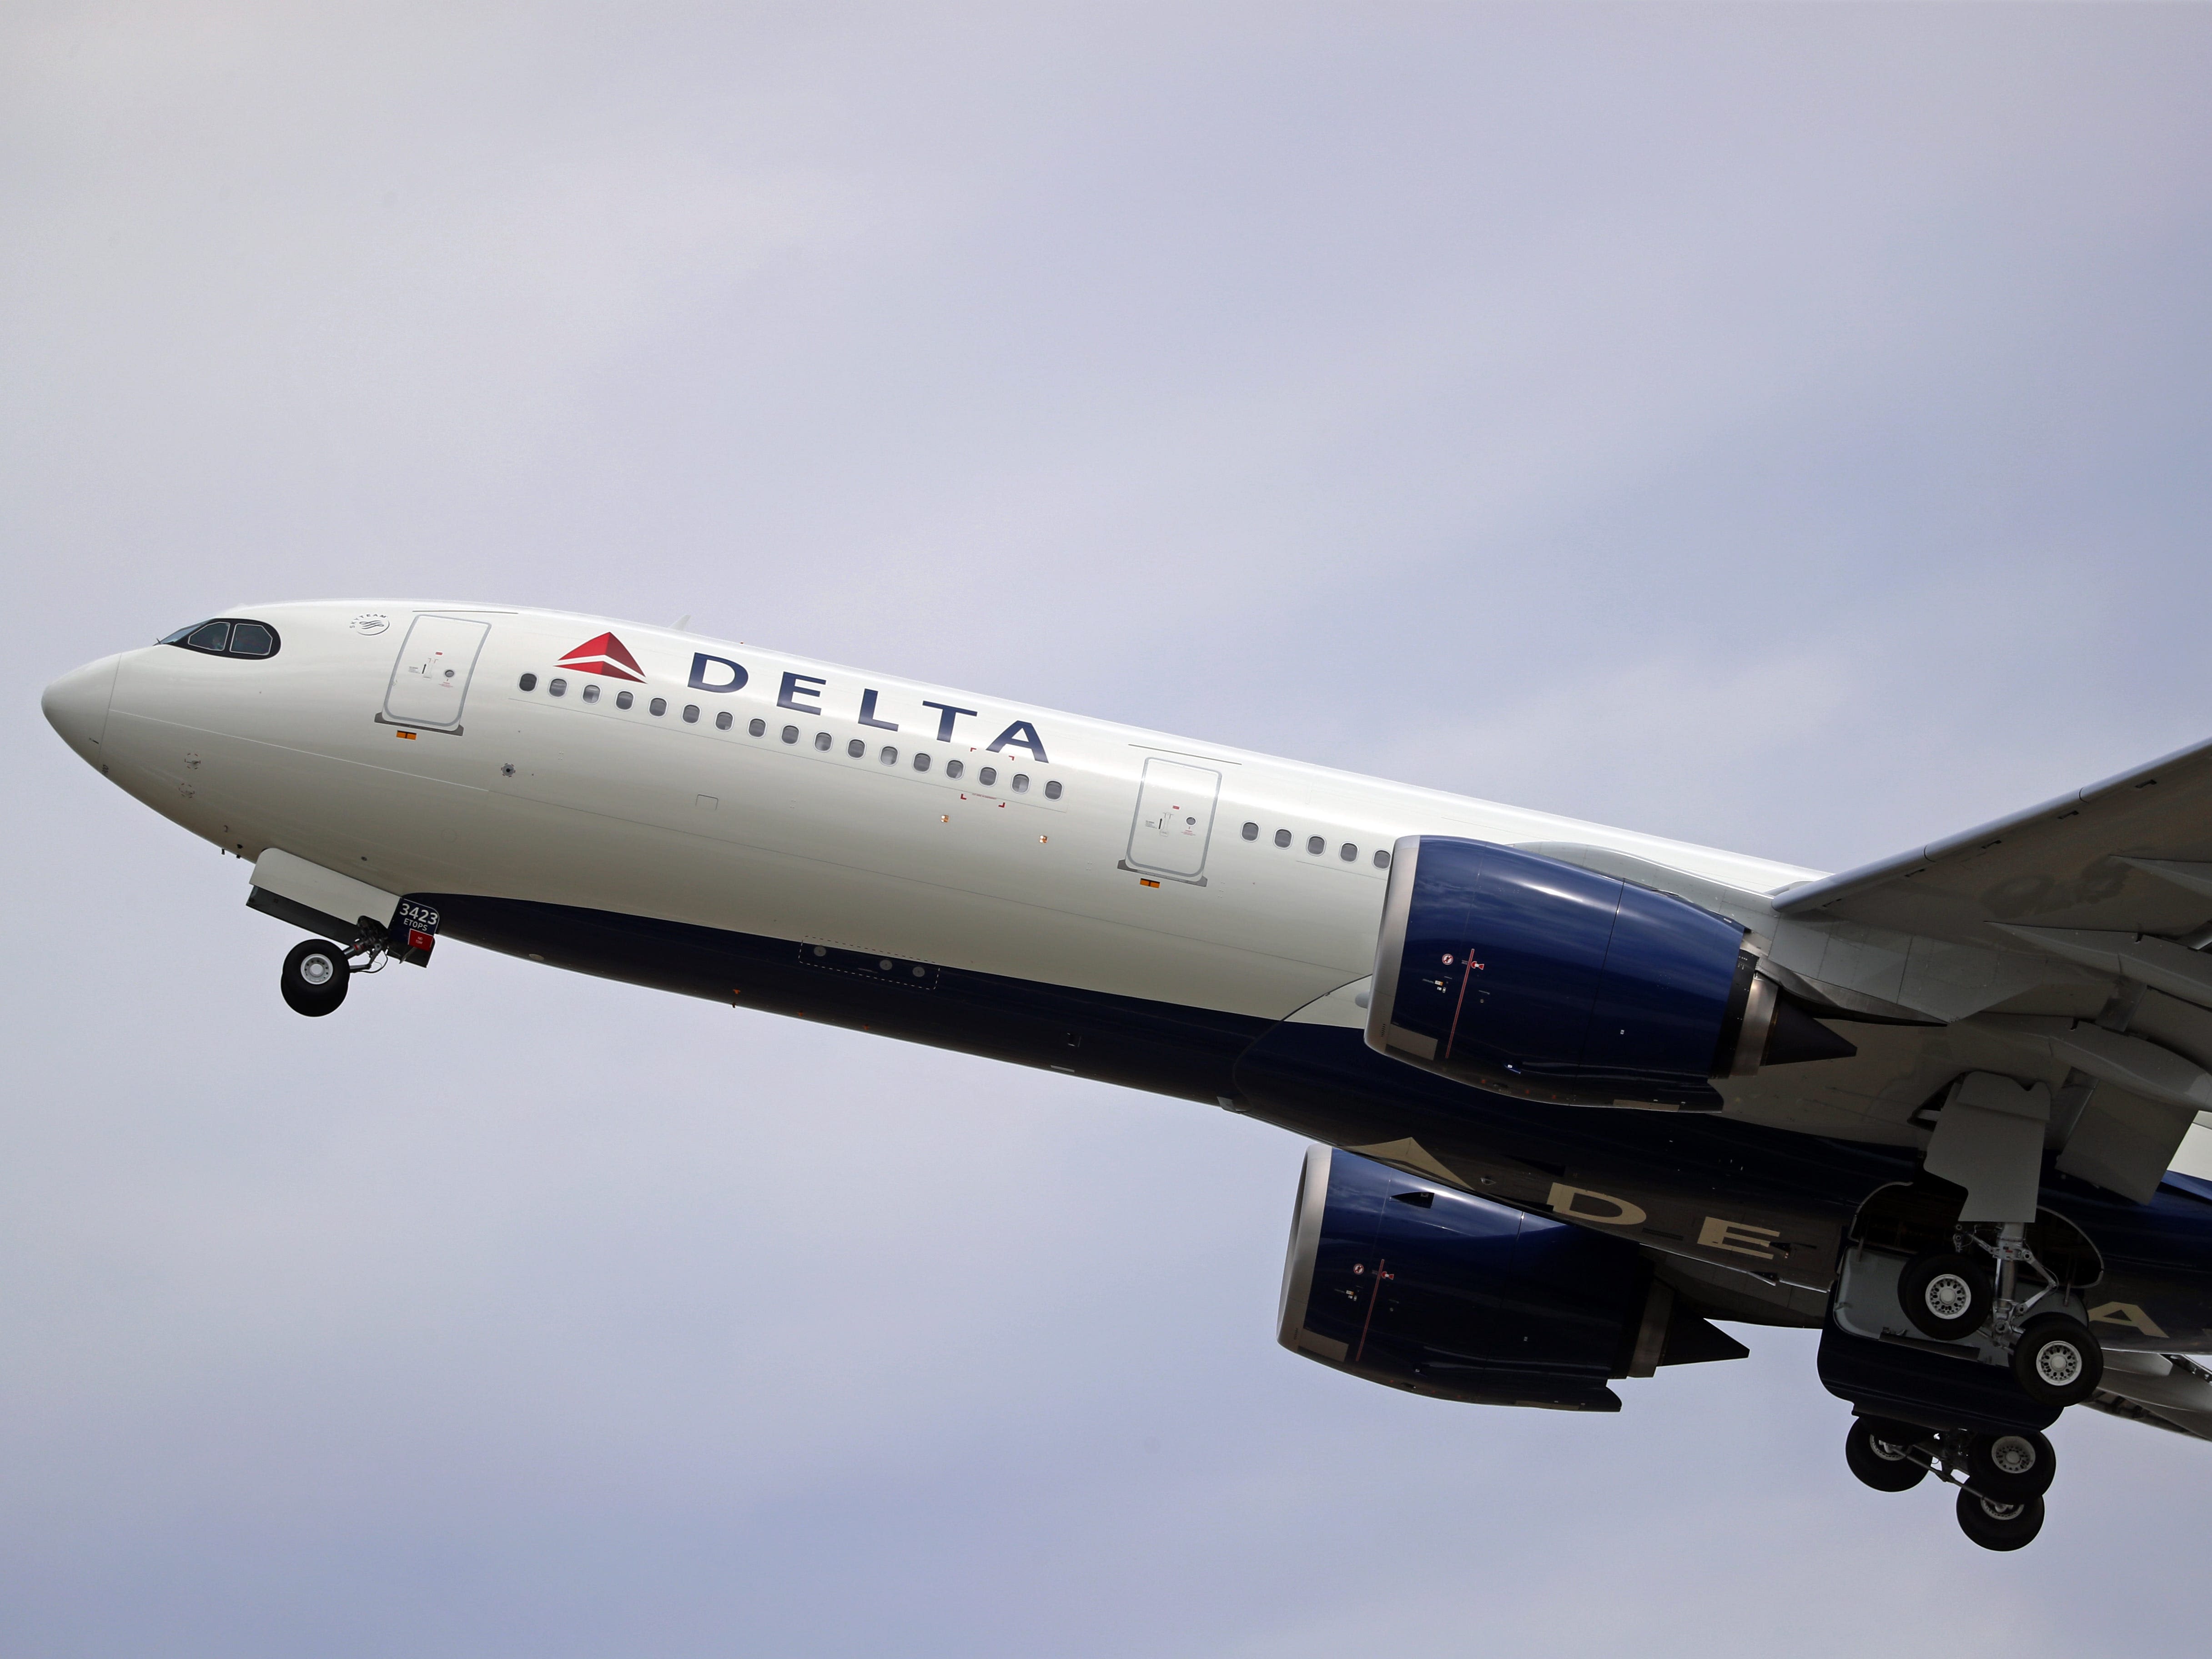 A passenger is suing Delta for $1 million, saying he broke a rib when he leaned on his armrest and it collapsed